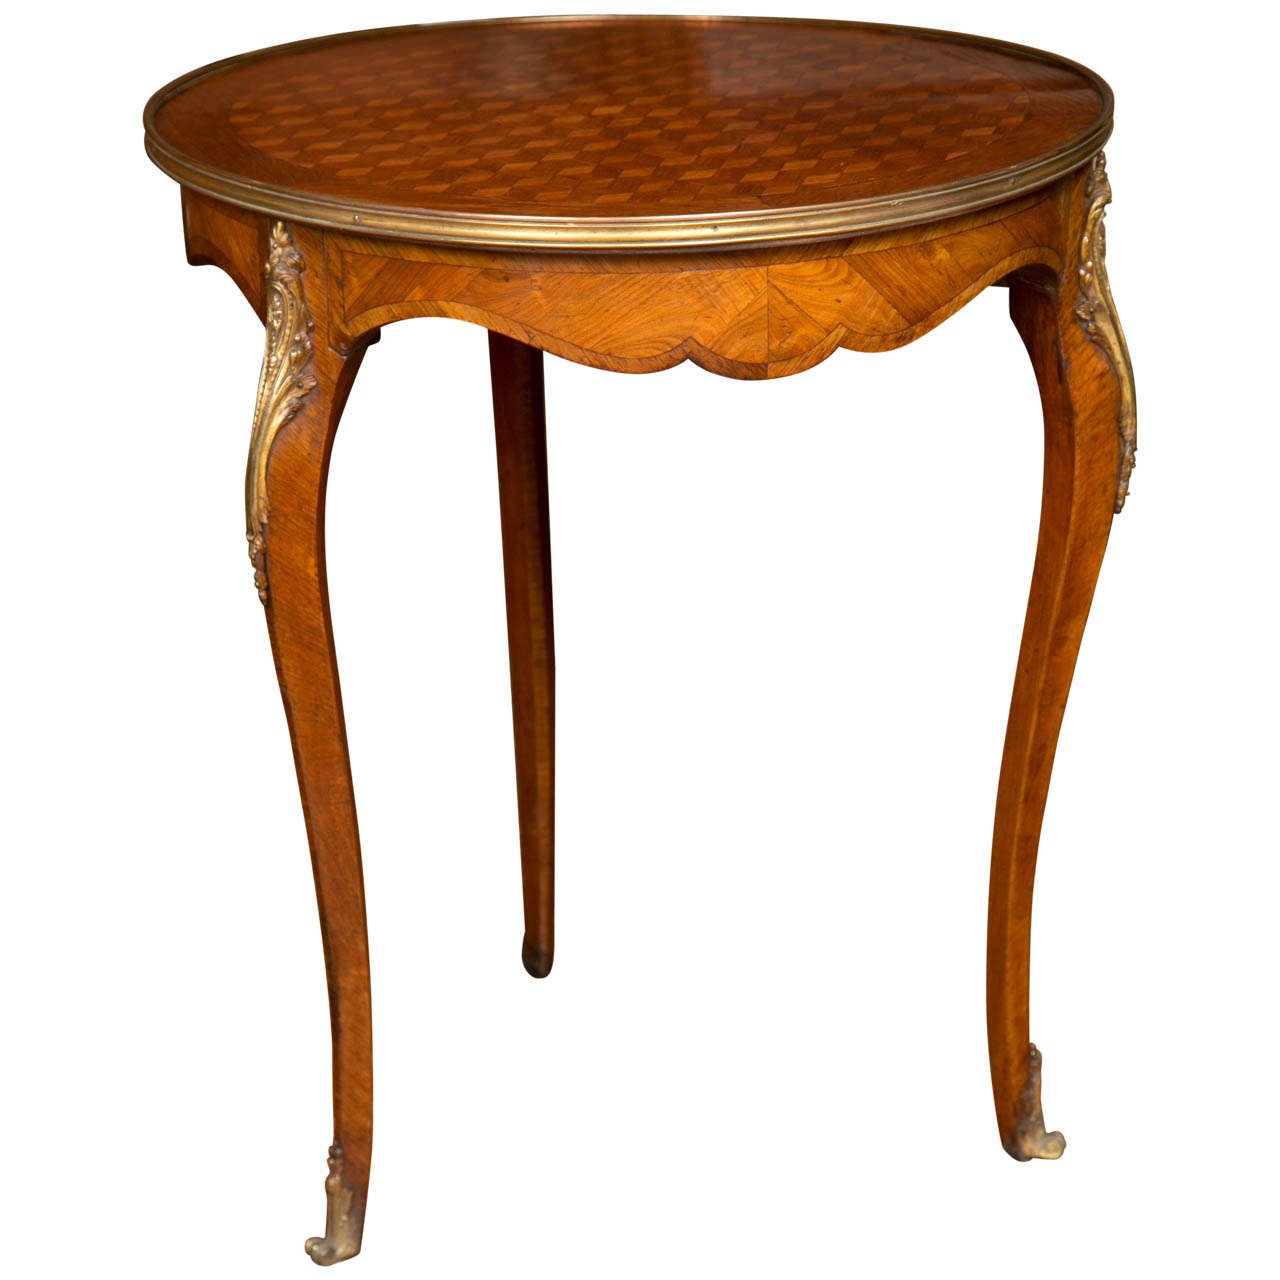 French Parquetry Guéridon Table